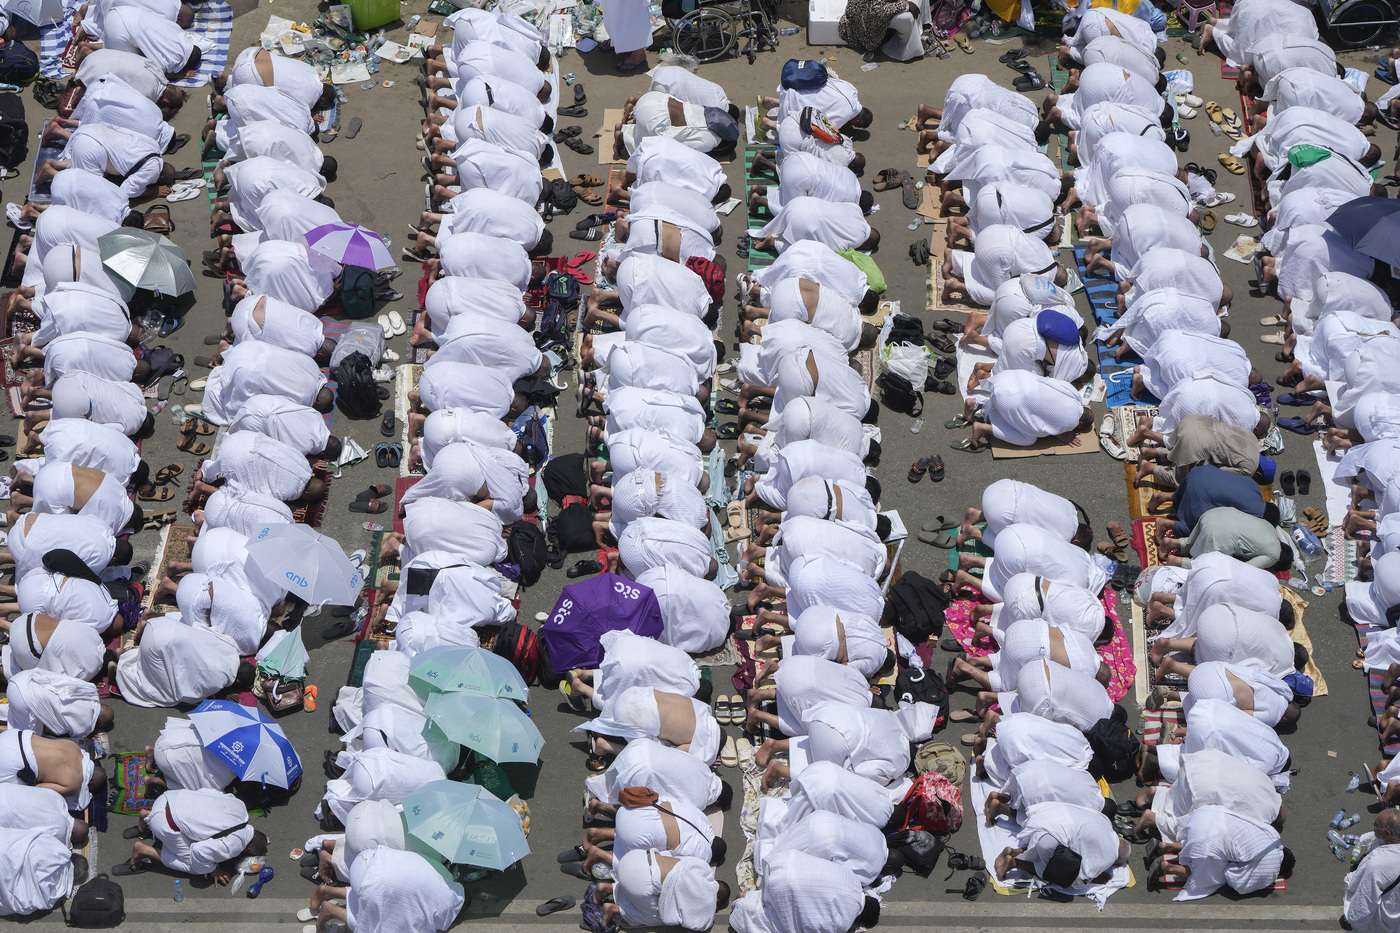 Muslim pilgrims pray outside Namira Mosque in Arafat, on the second day of the annual Hajj pilgrimage, near the holy city of Mecca, Saudi Arabia, Tuesday, June 27, 2023. Around two million pilgrims are converging on Saudi Arabia's holy city of Mecca for the largest Hajj since the coronavirus pandemic severely curtailed access to one of Islam's five pillars. (AP Photo/Amr Nabil)